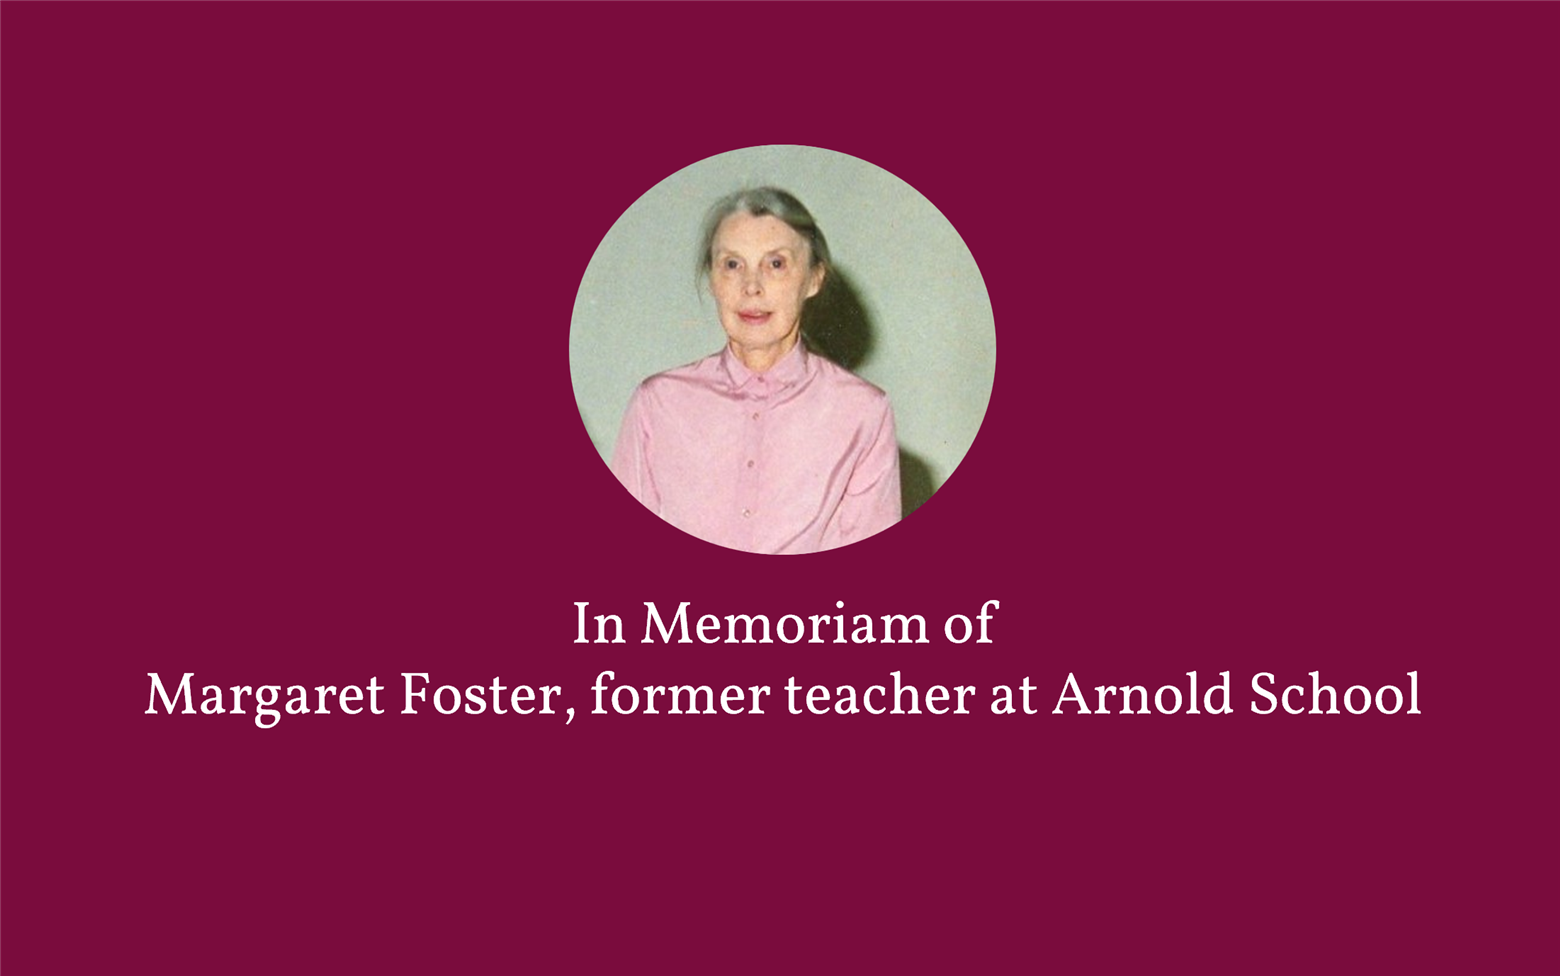 Margaret Foster - Fondly Remembered